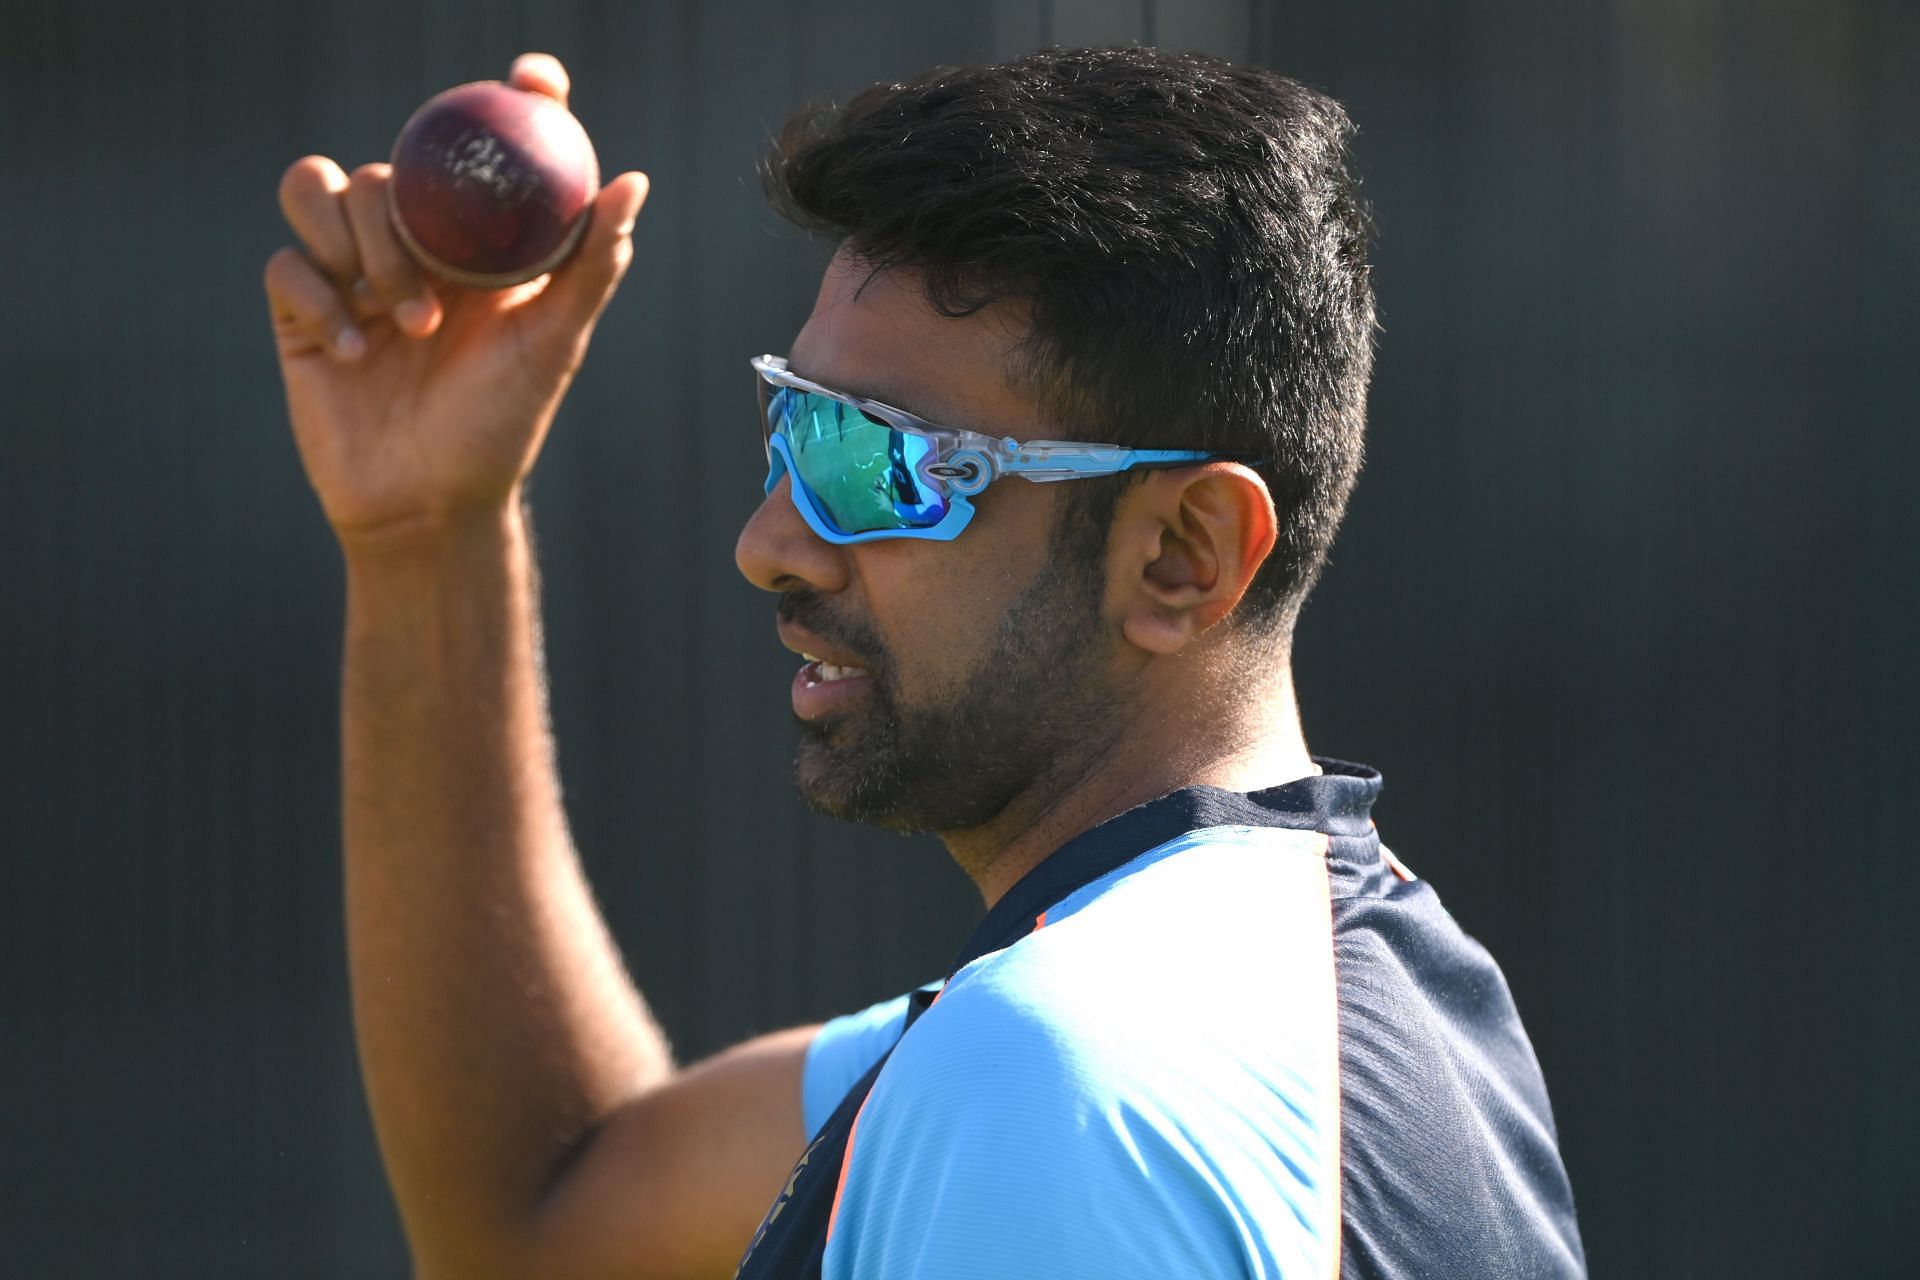 Ravichanran Ashwin picked two wickets in the 1st T20I vs West Indies.